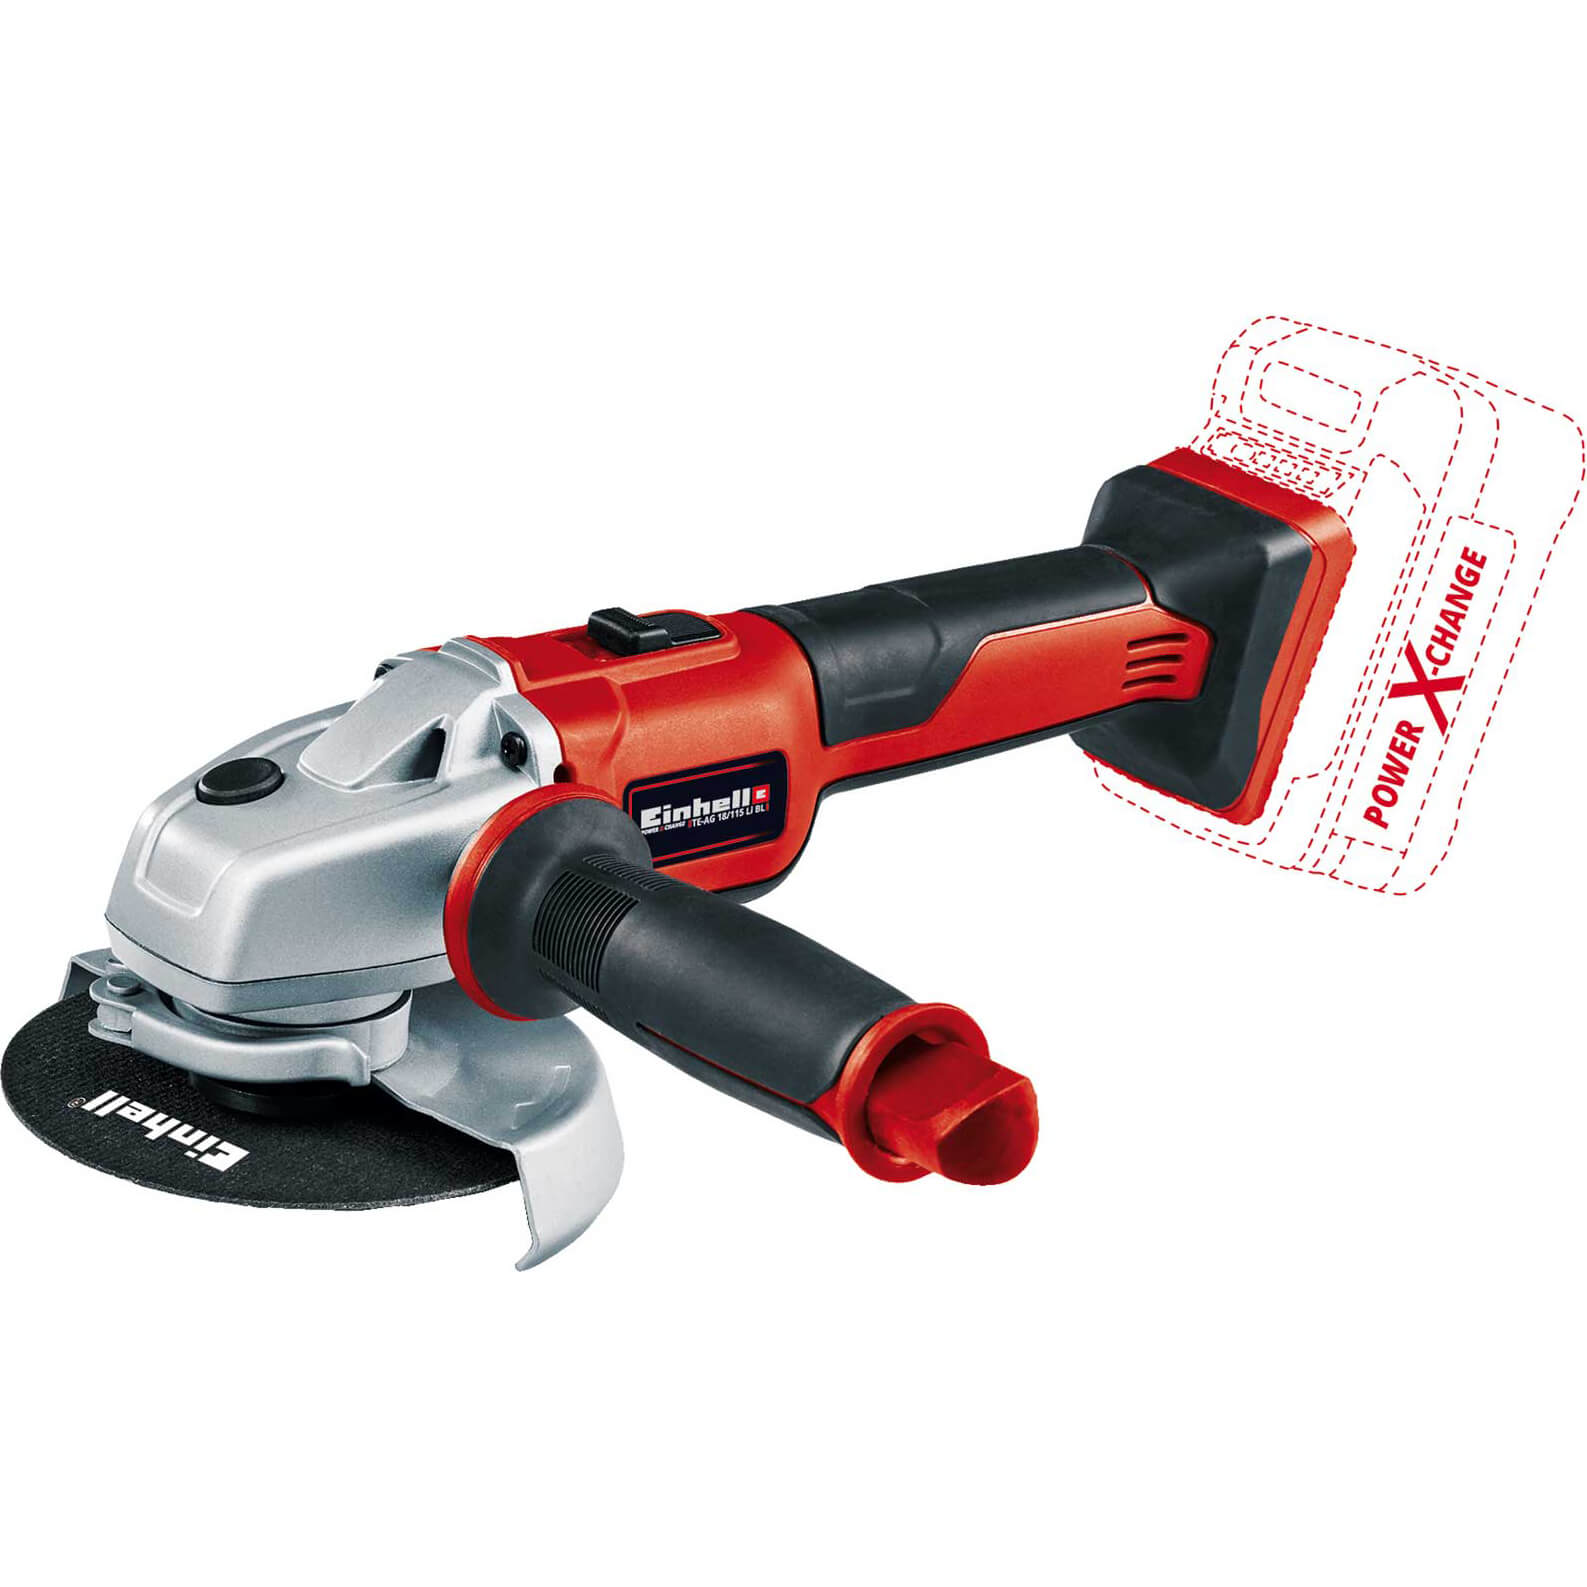 Image of Einhell AXXIO 18v Cordless Brushless Angle Grinder 115mm No Batteries No Charger No Case